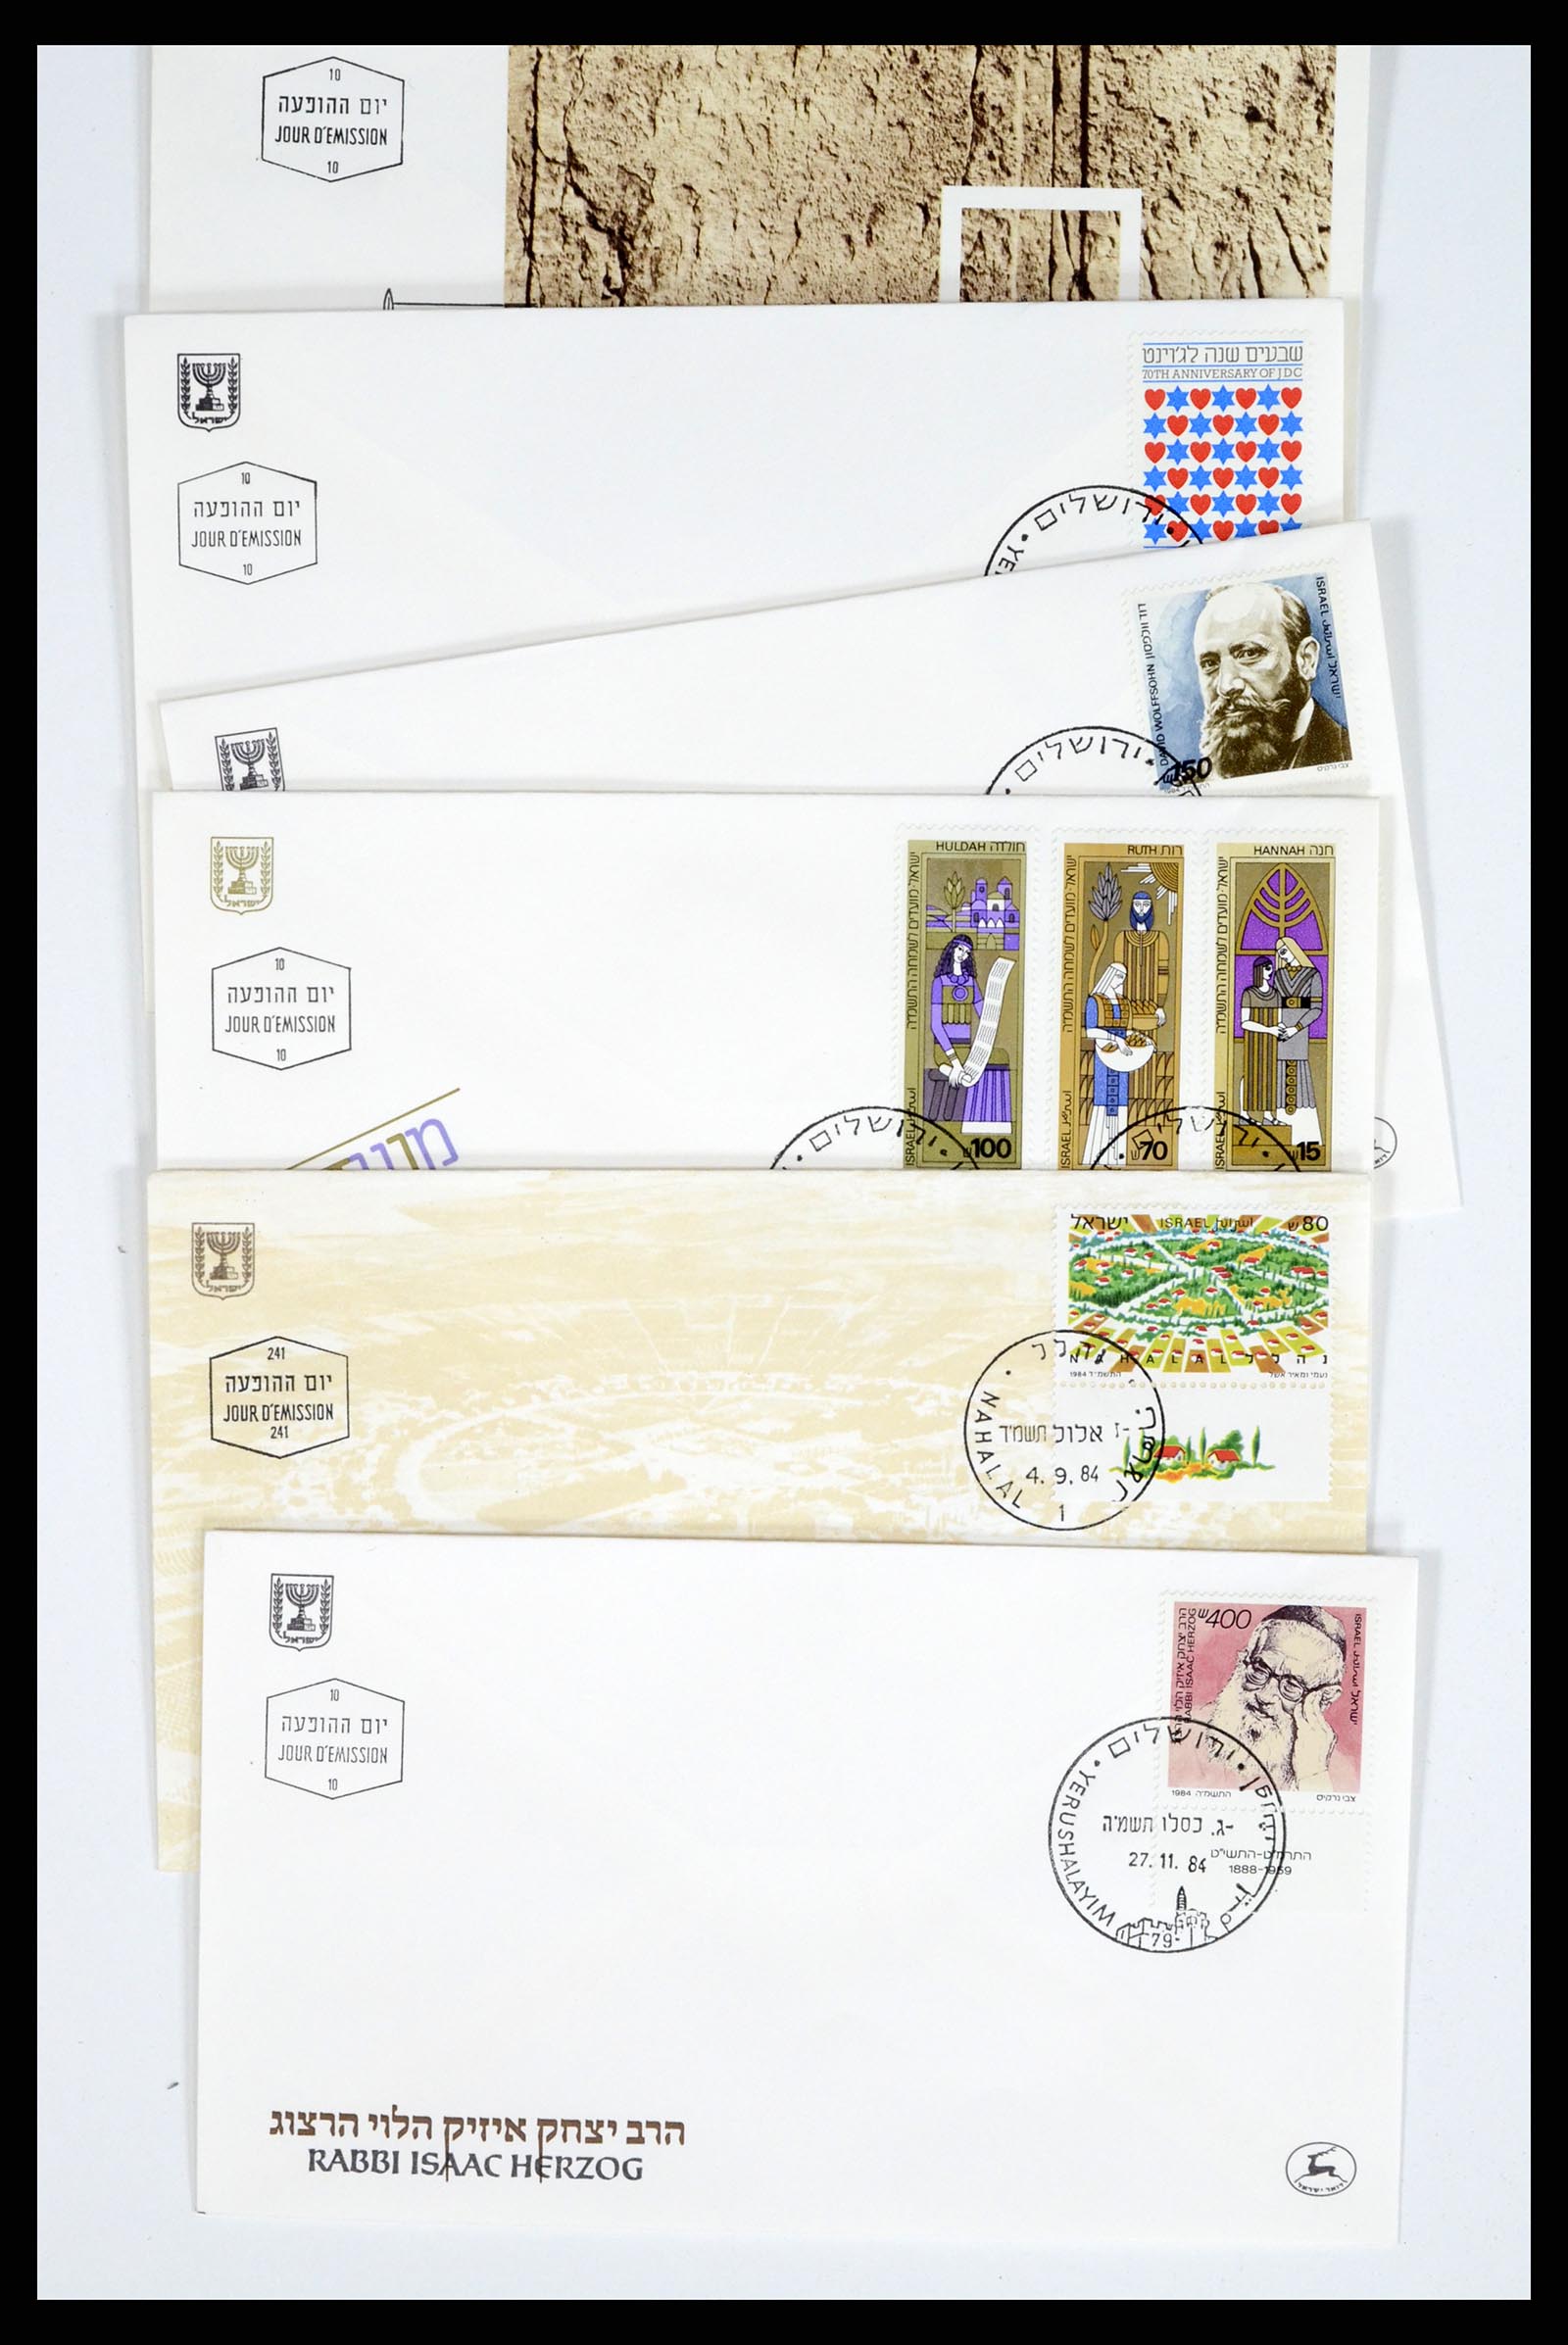 37711 021 - Stamp collection 37711 Israel first day covers 1970-2000.